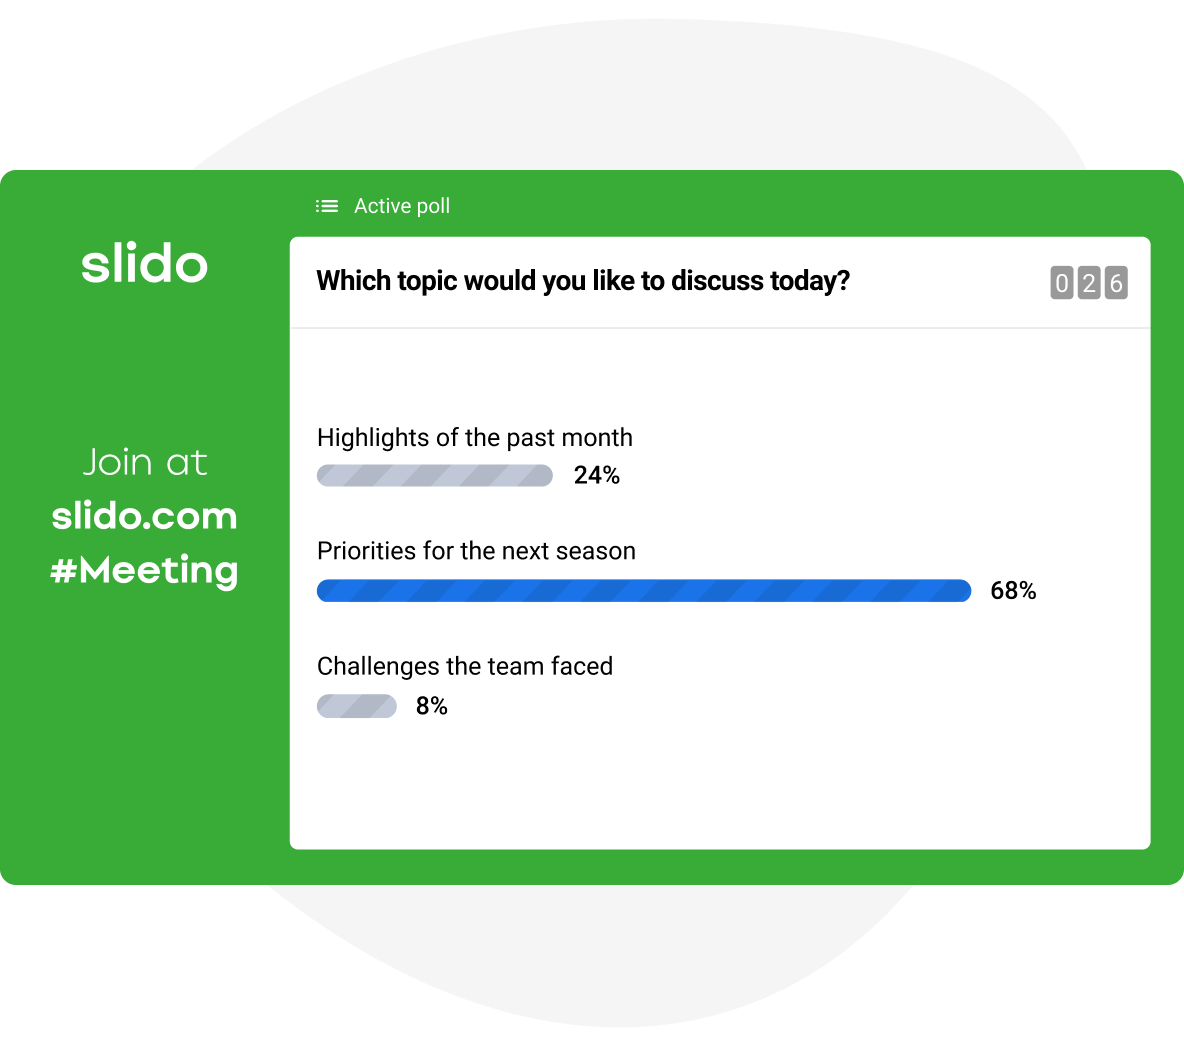 A multiple choice poll asking for opinion on which topic an audience would like to discuss today.